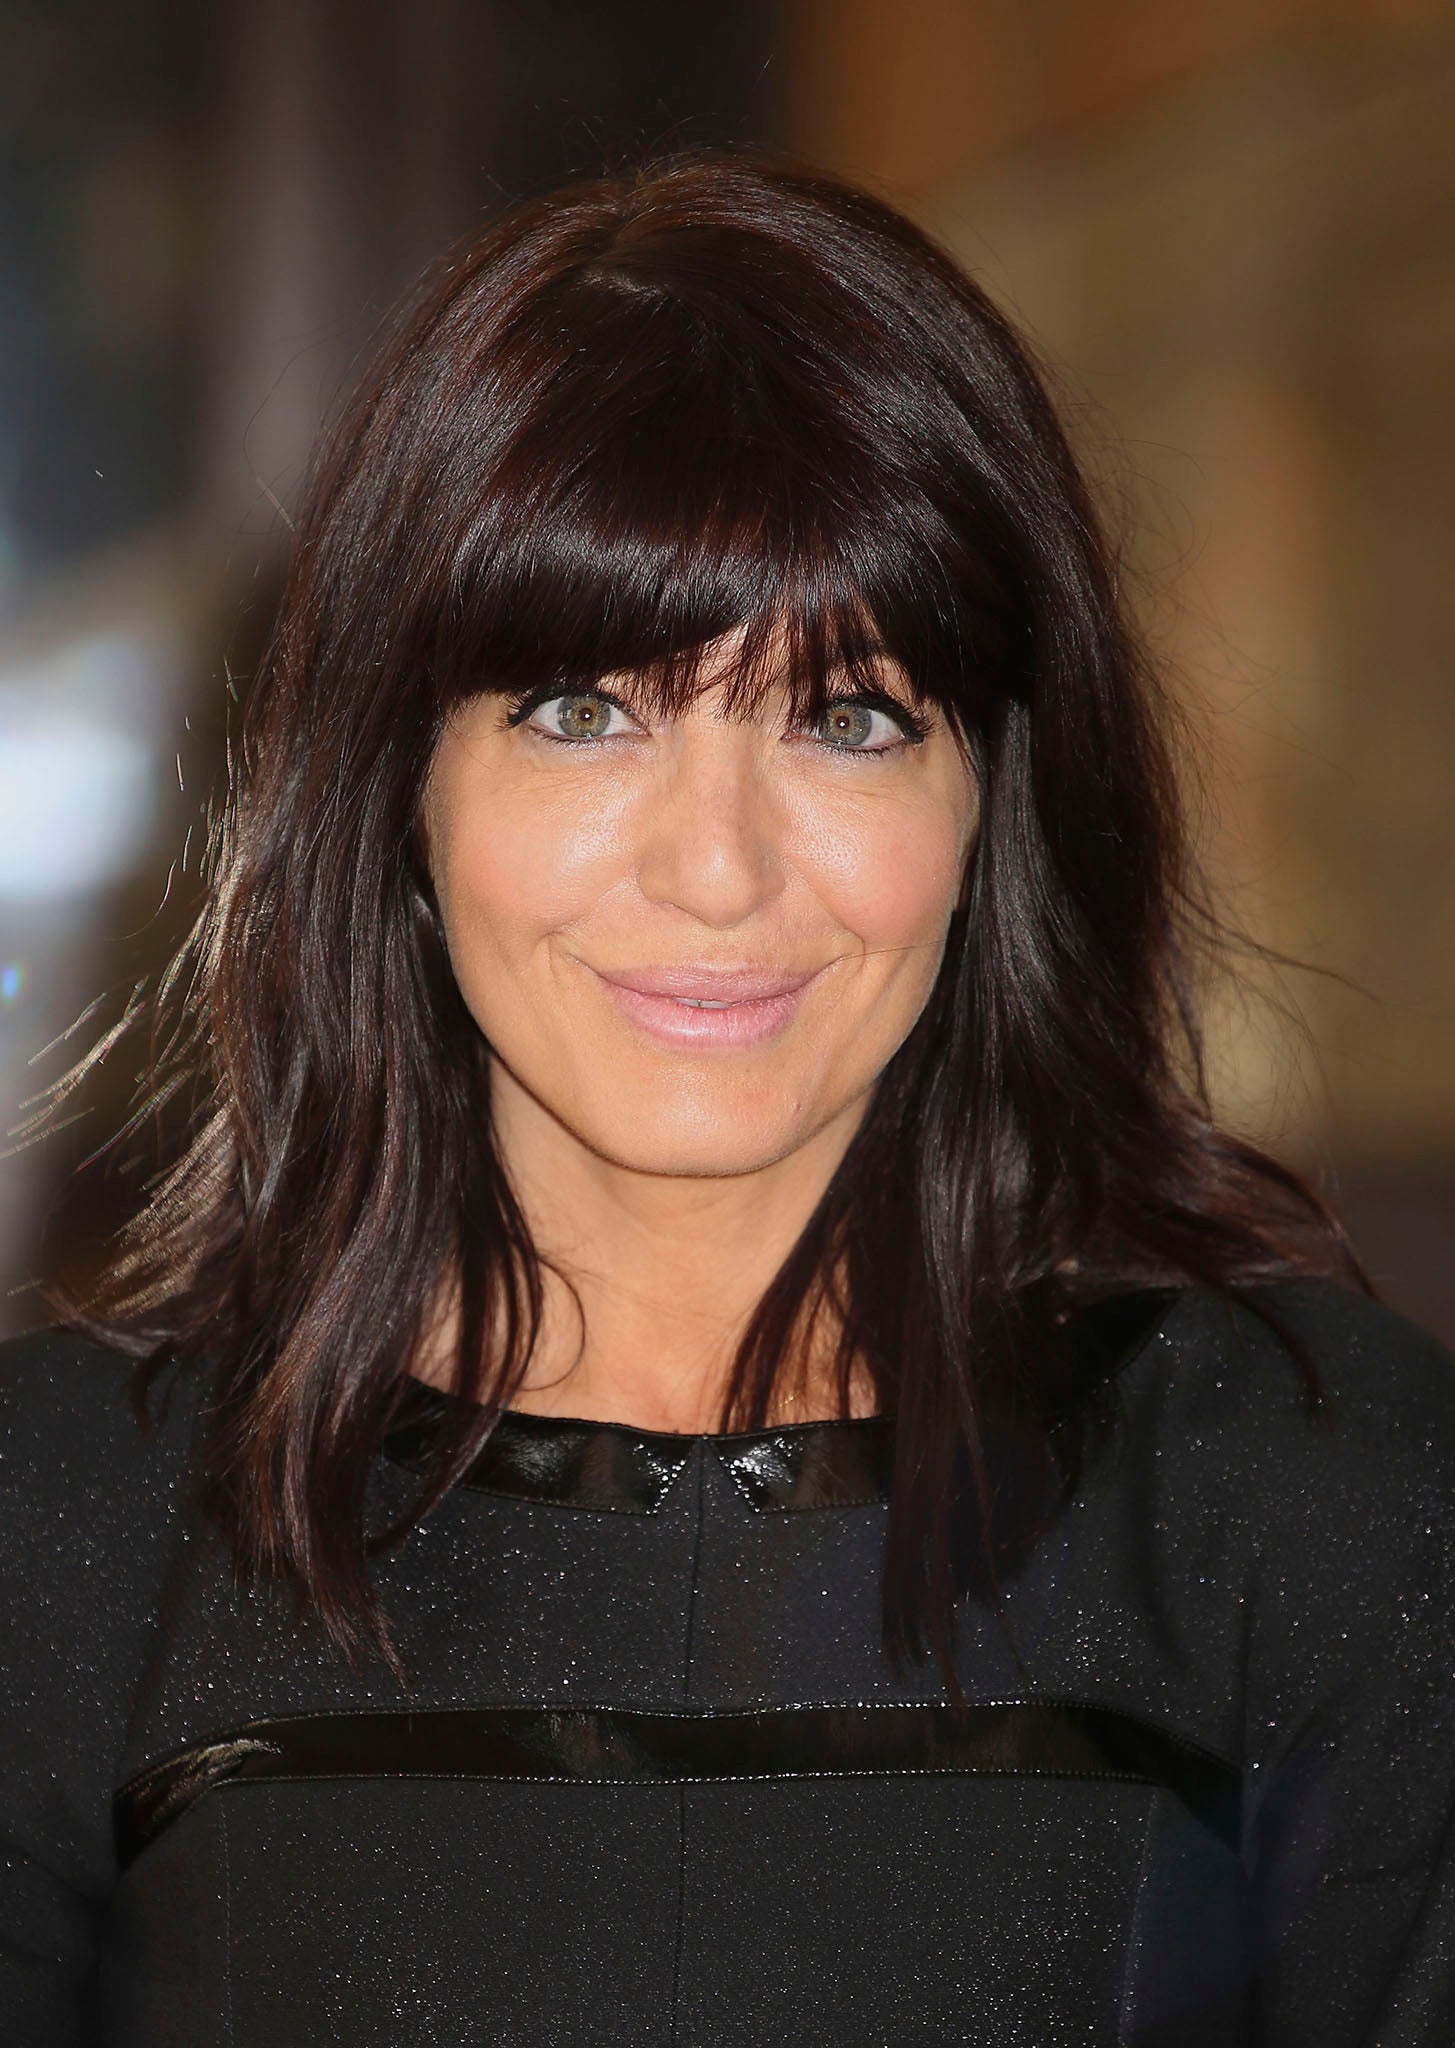 Claudia Winkleman is having another week off Strictly to care for her daughter